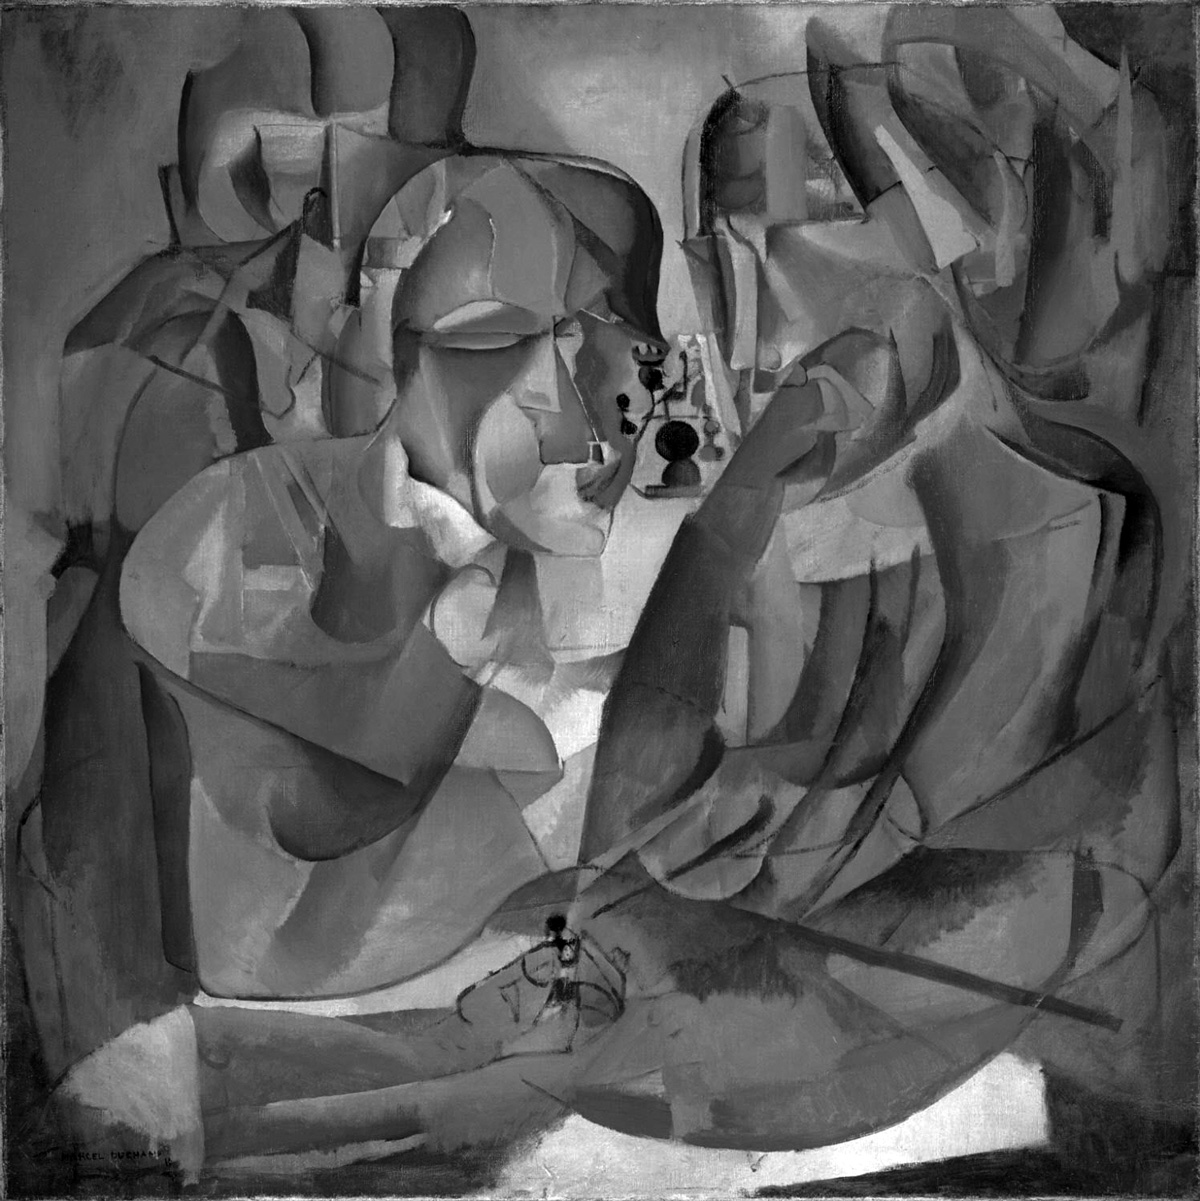 A Cubist painting of two people playing chess